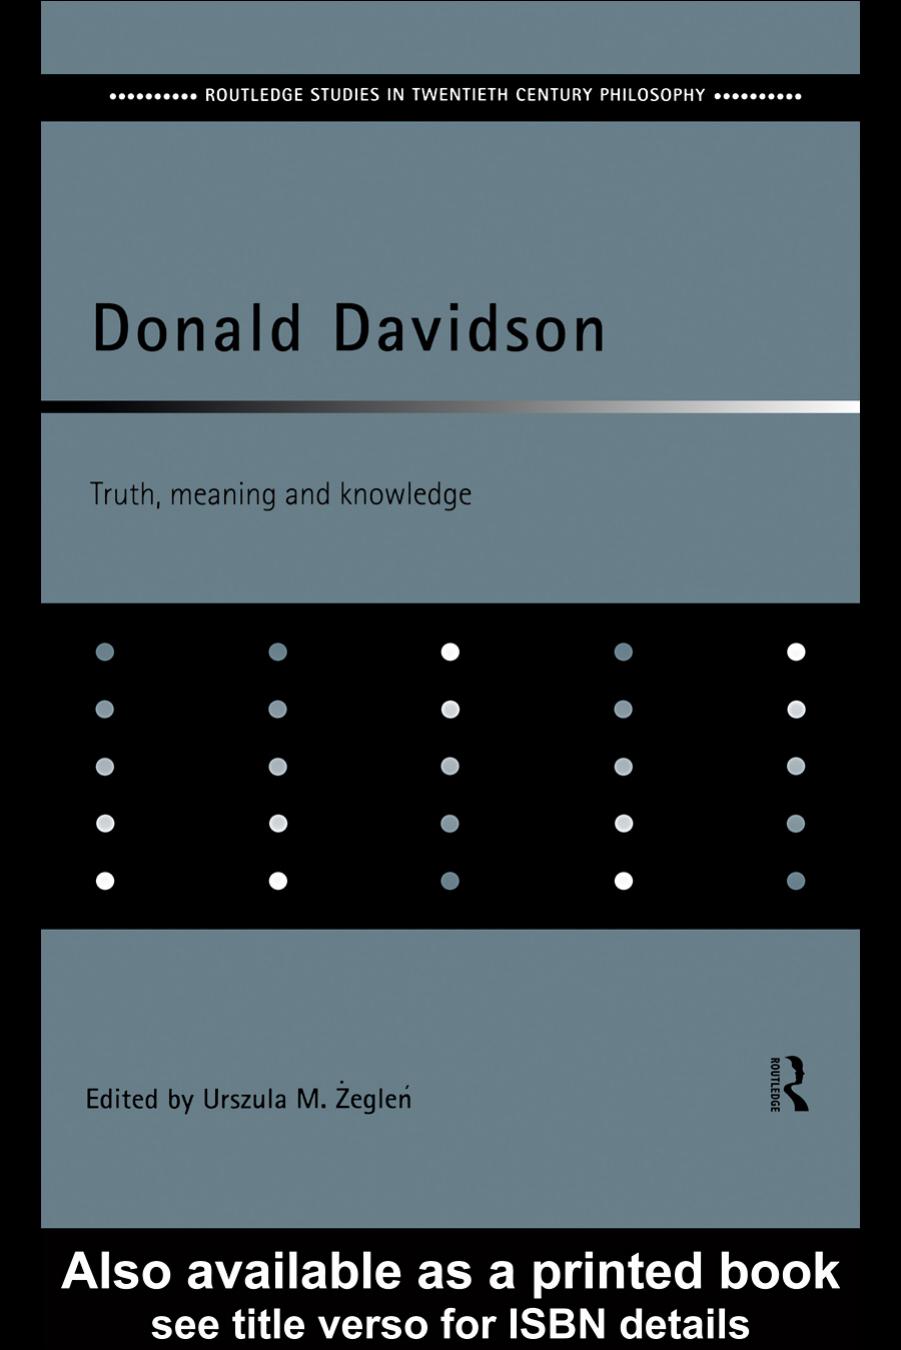 Donald Davidson: Truth, Meaning, and Knowledge